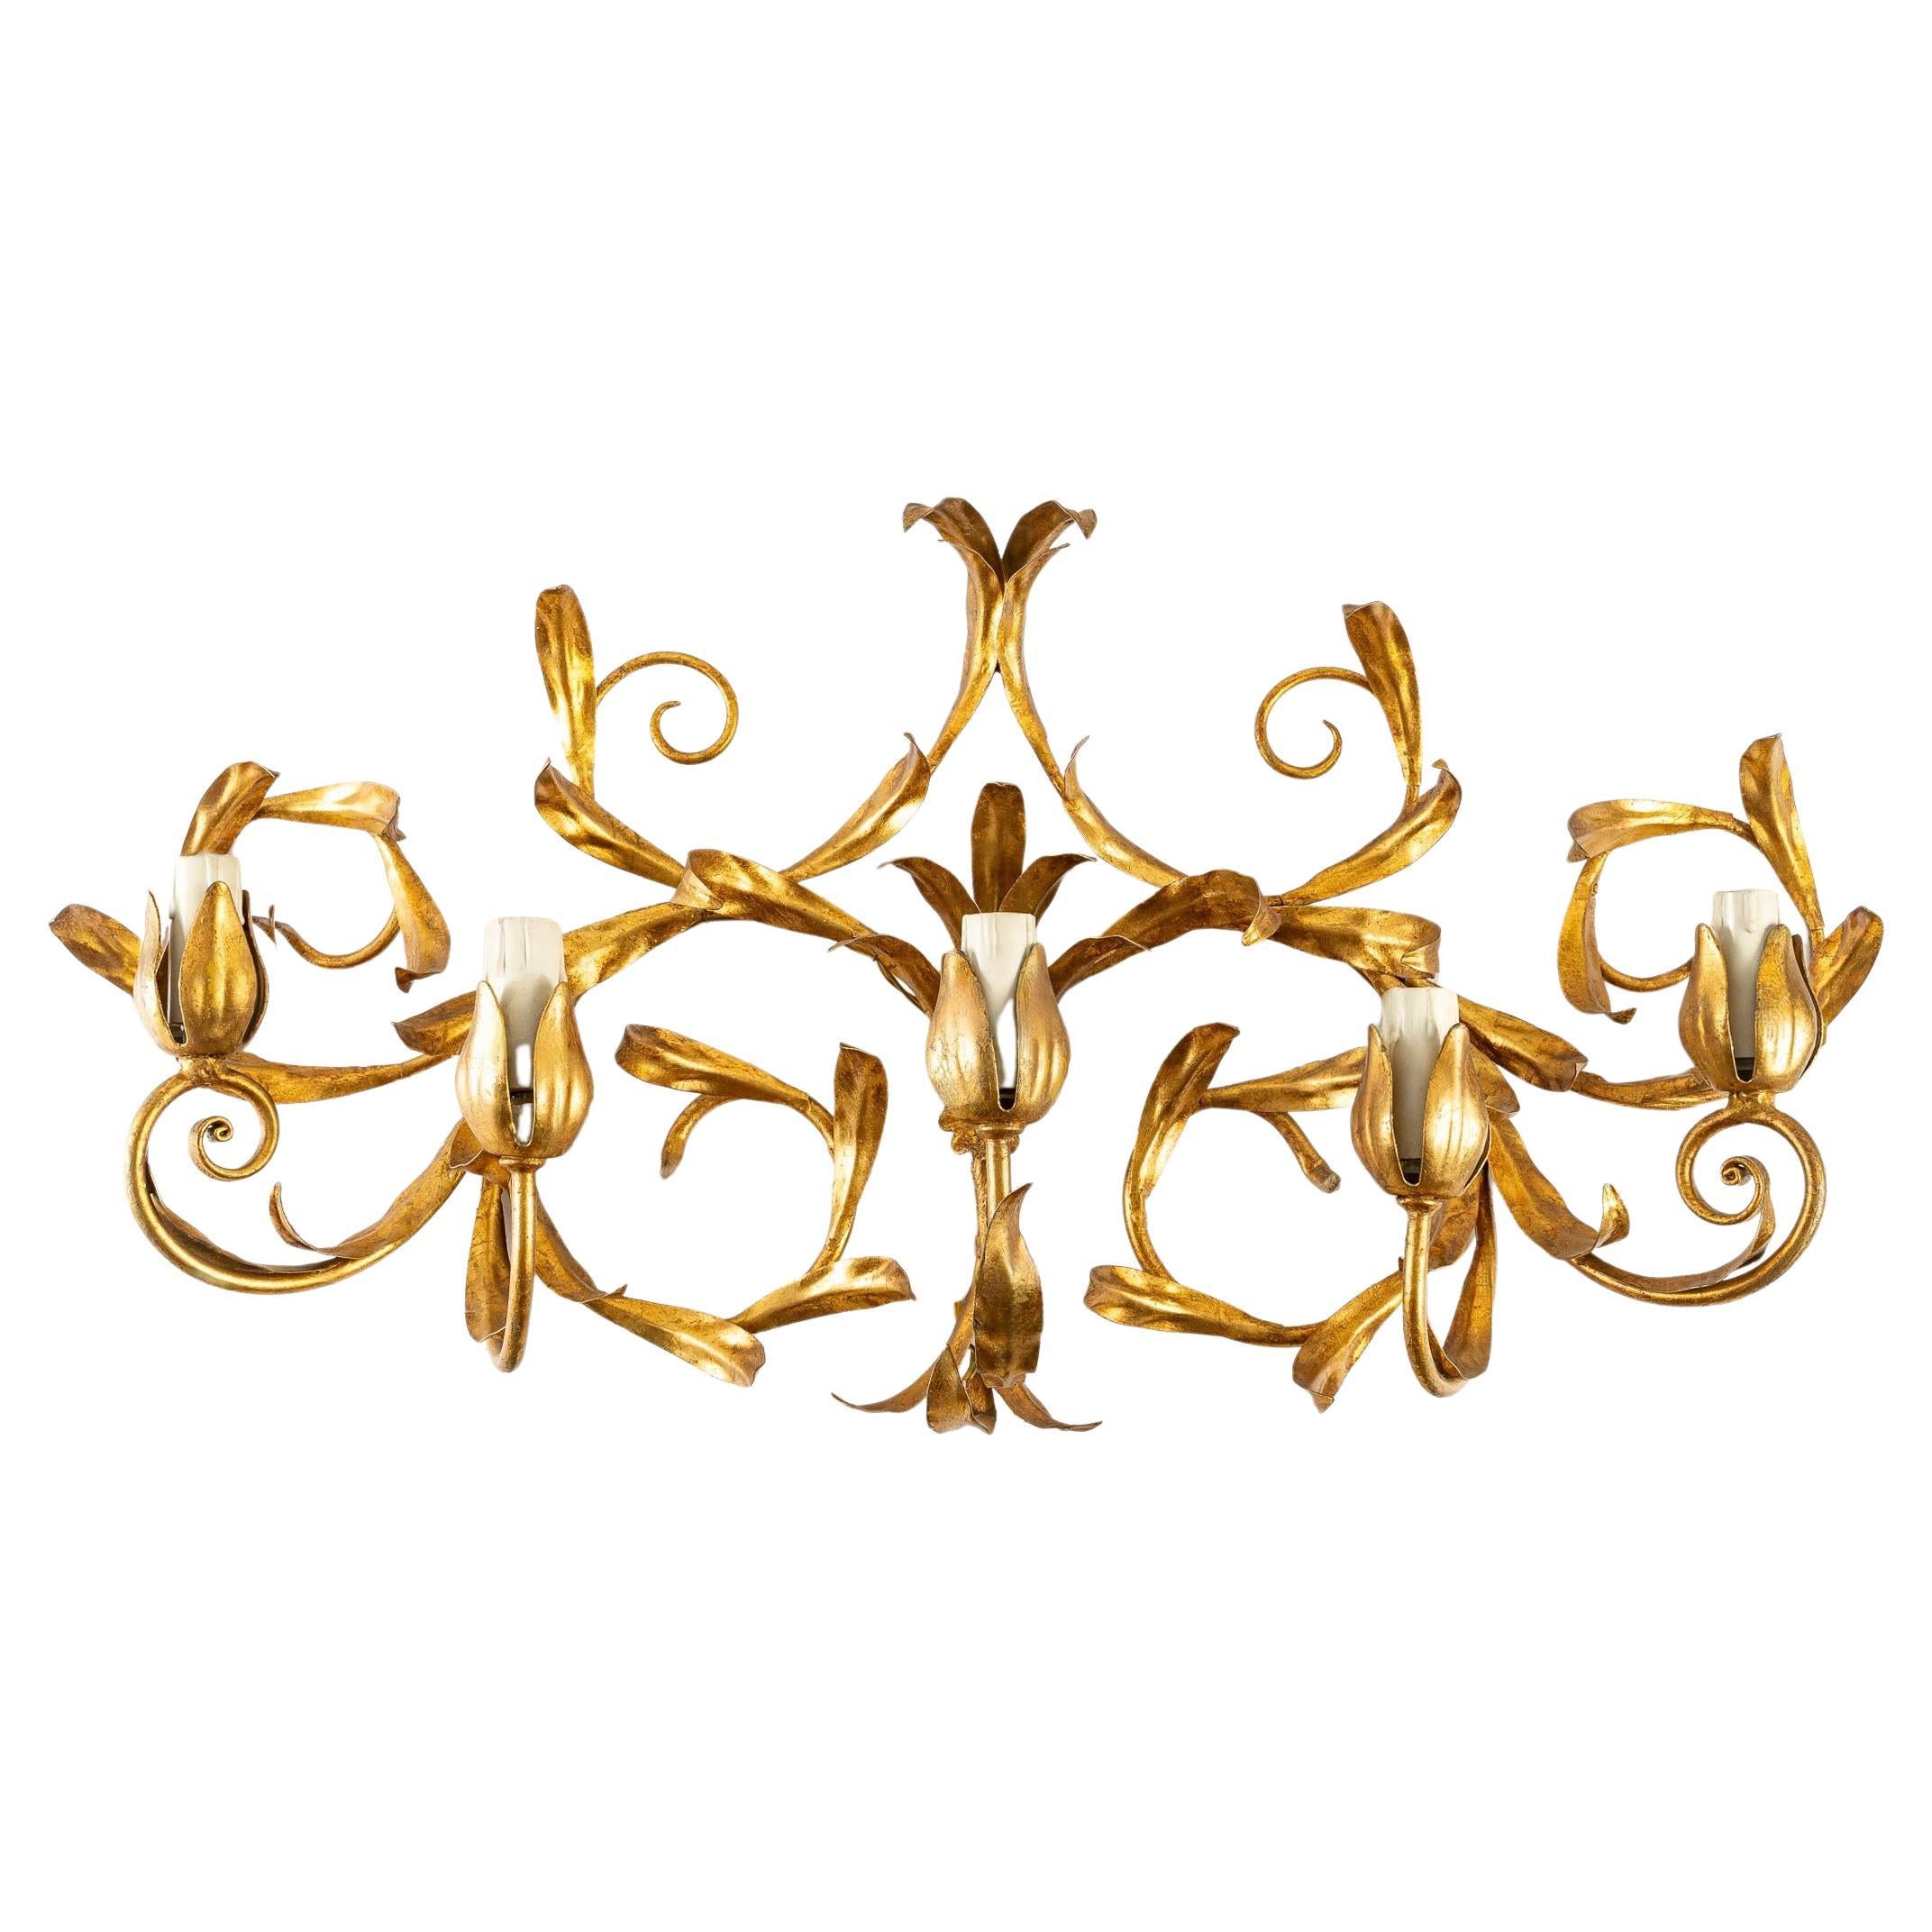 Charming pair of floral sconces in gilded sheet metal.
Composed of a garland of foliage lengthened in the direction of the width in gilded sheet decorated with 5 small arms of light going up distributed on the width of the wall lamp and dressed with